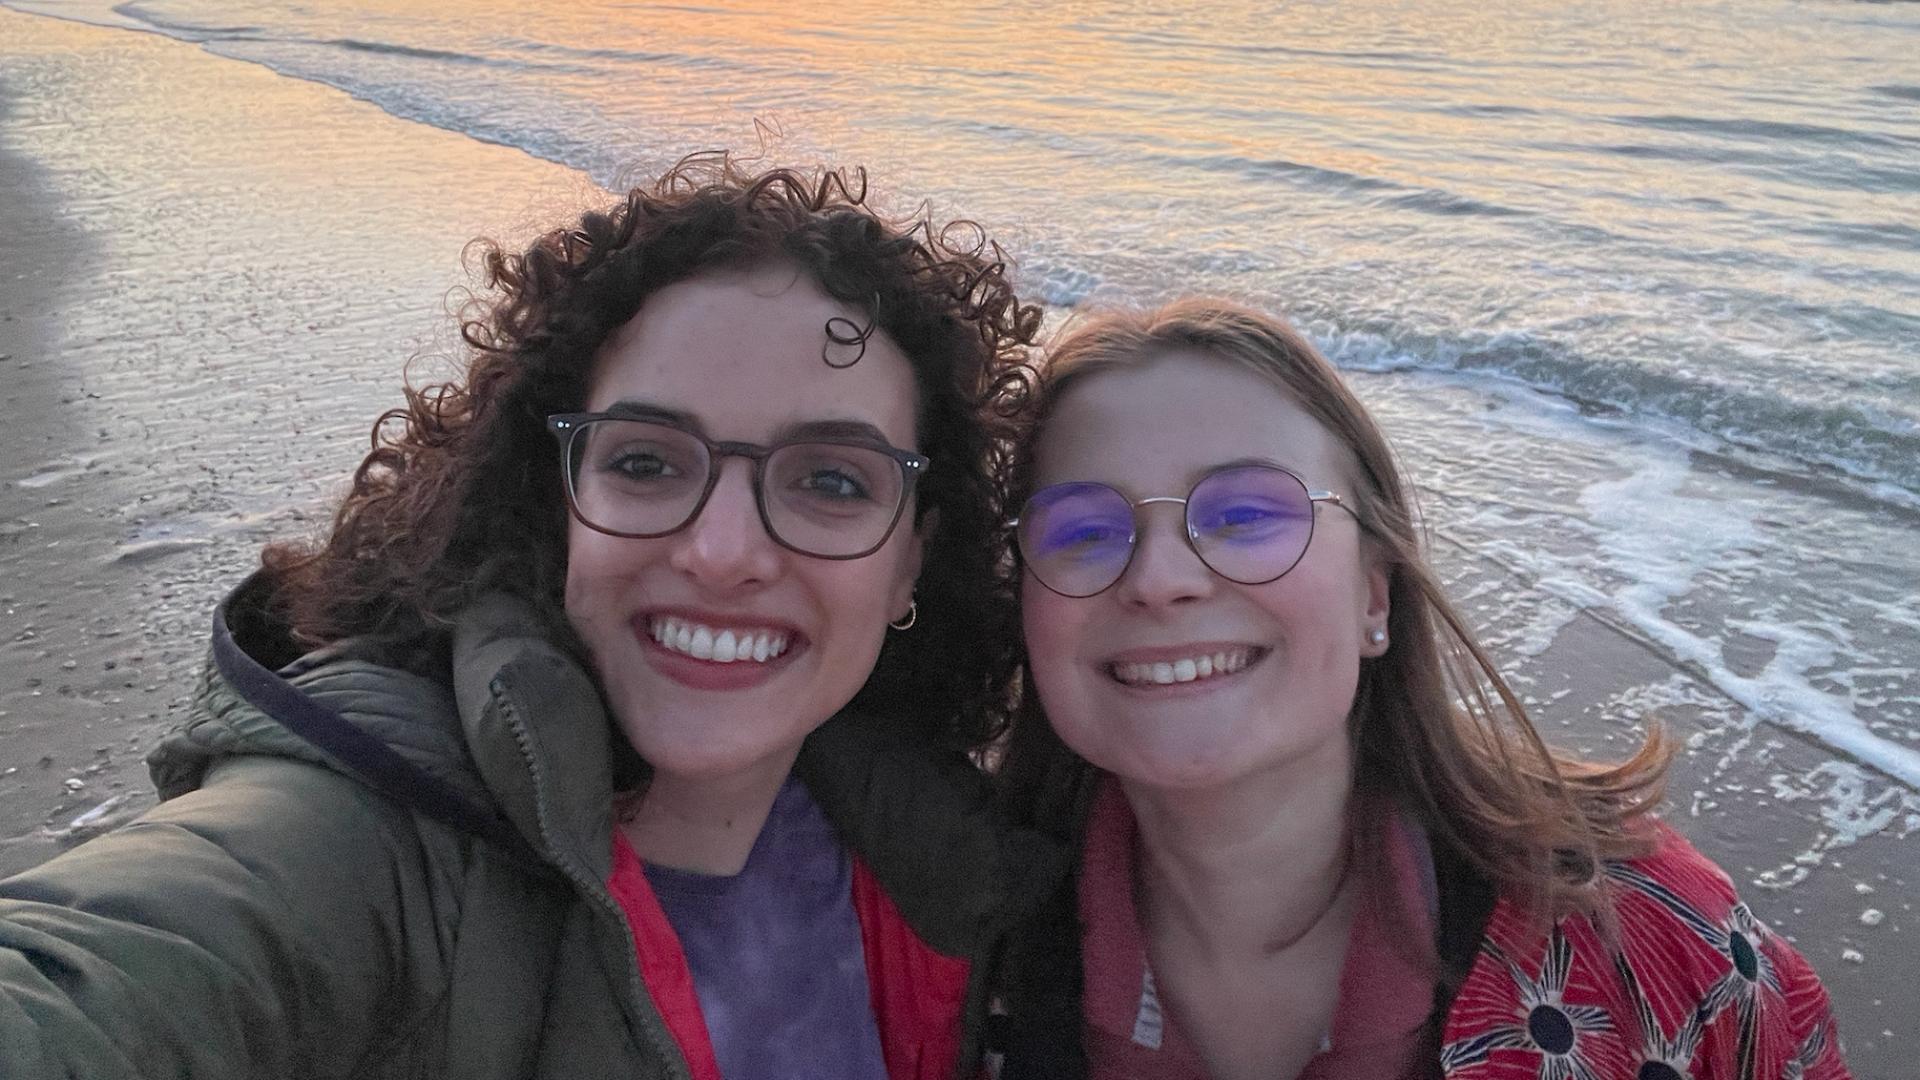 Me and my friend smile in front of the beach! It's sunset and the orange rays light up the ocean beautifully.